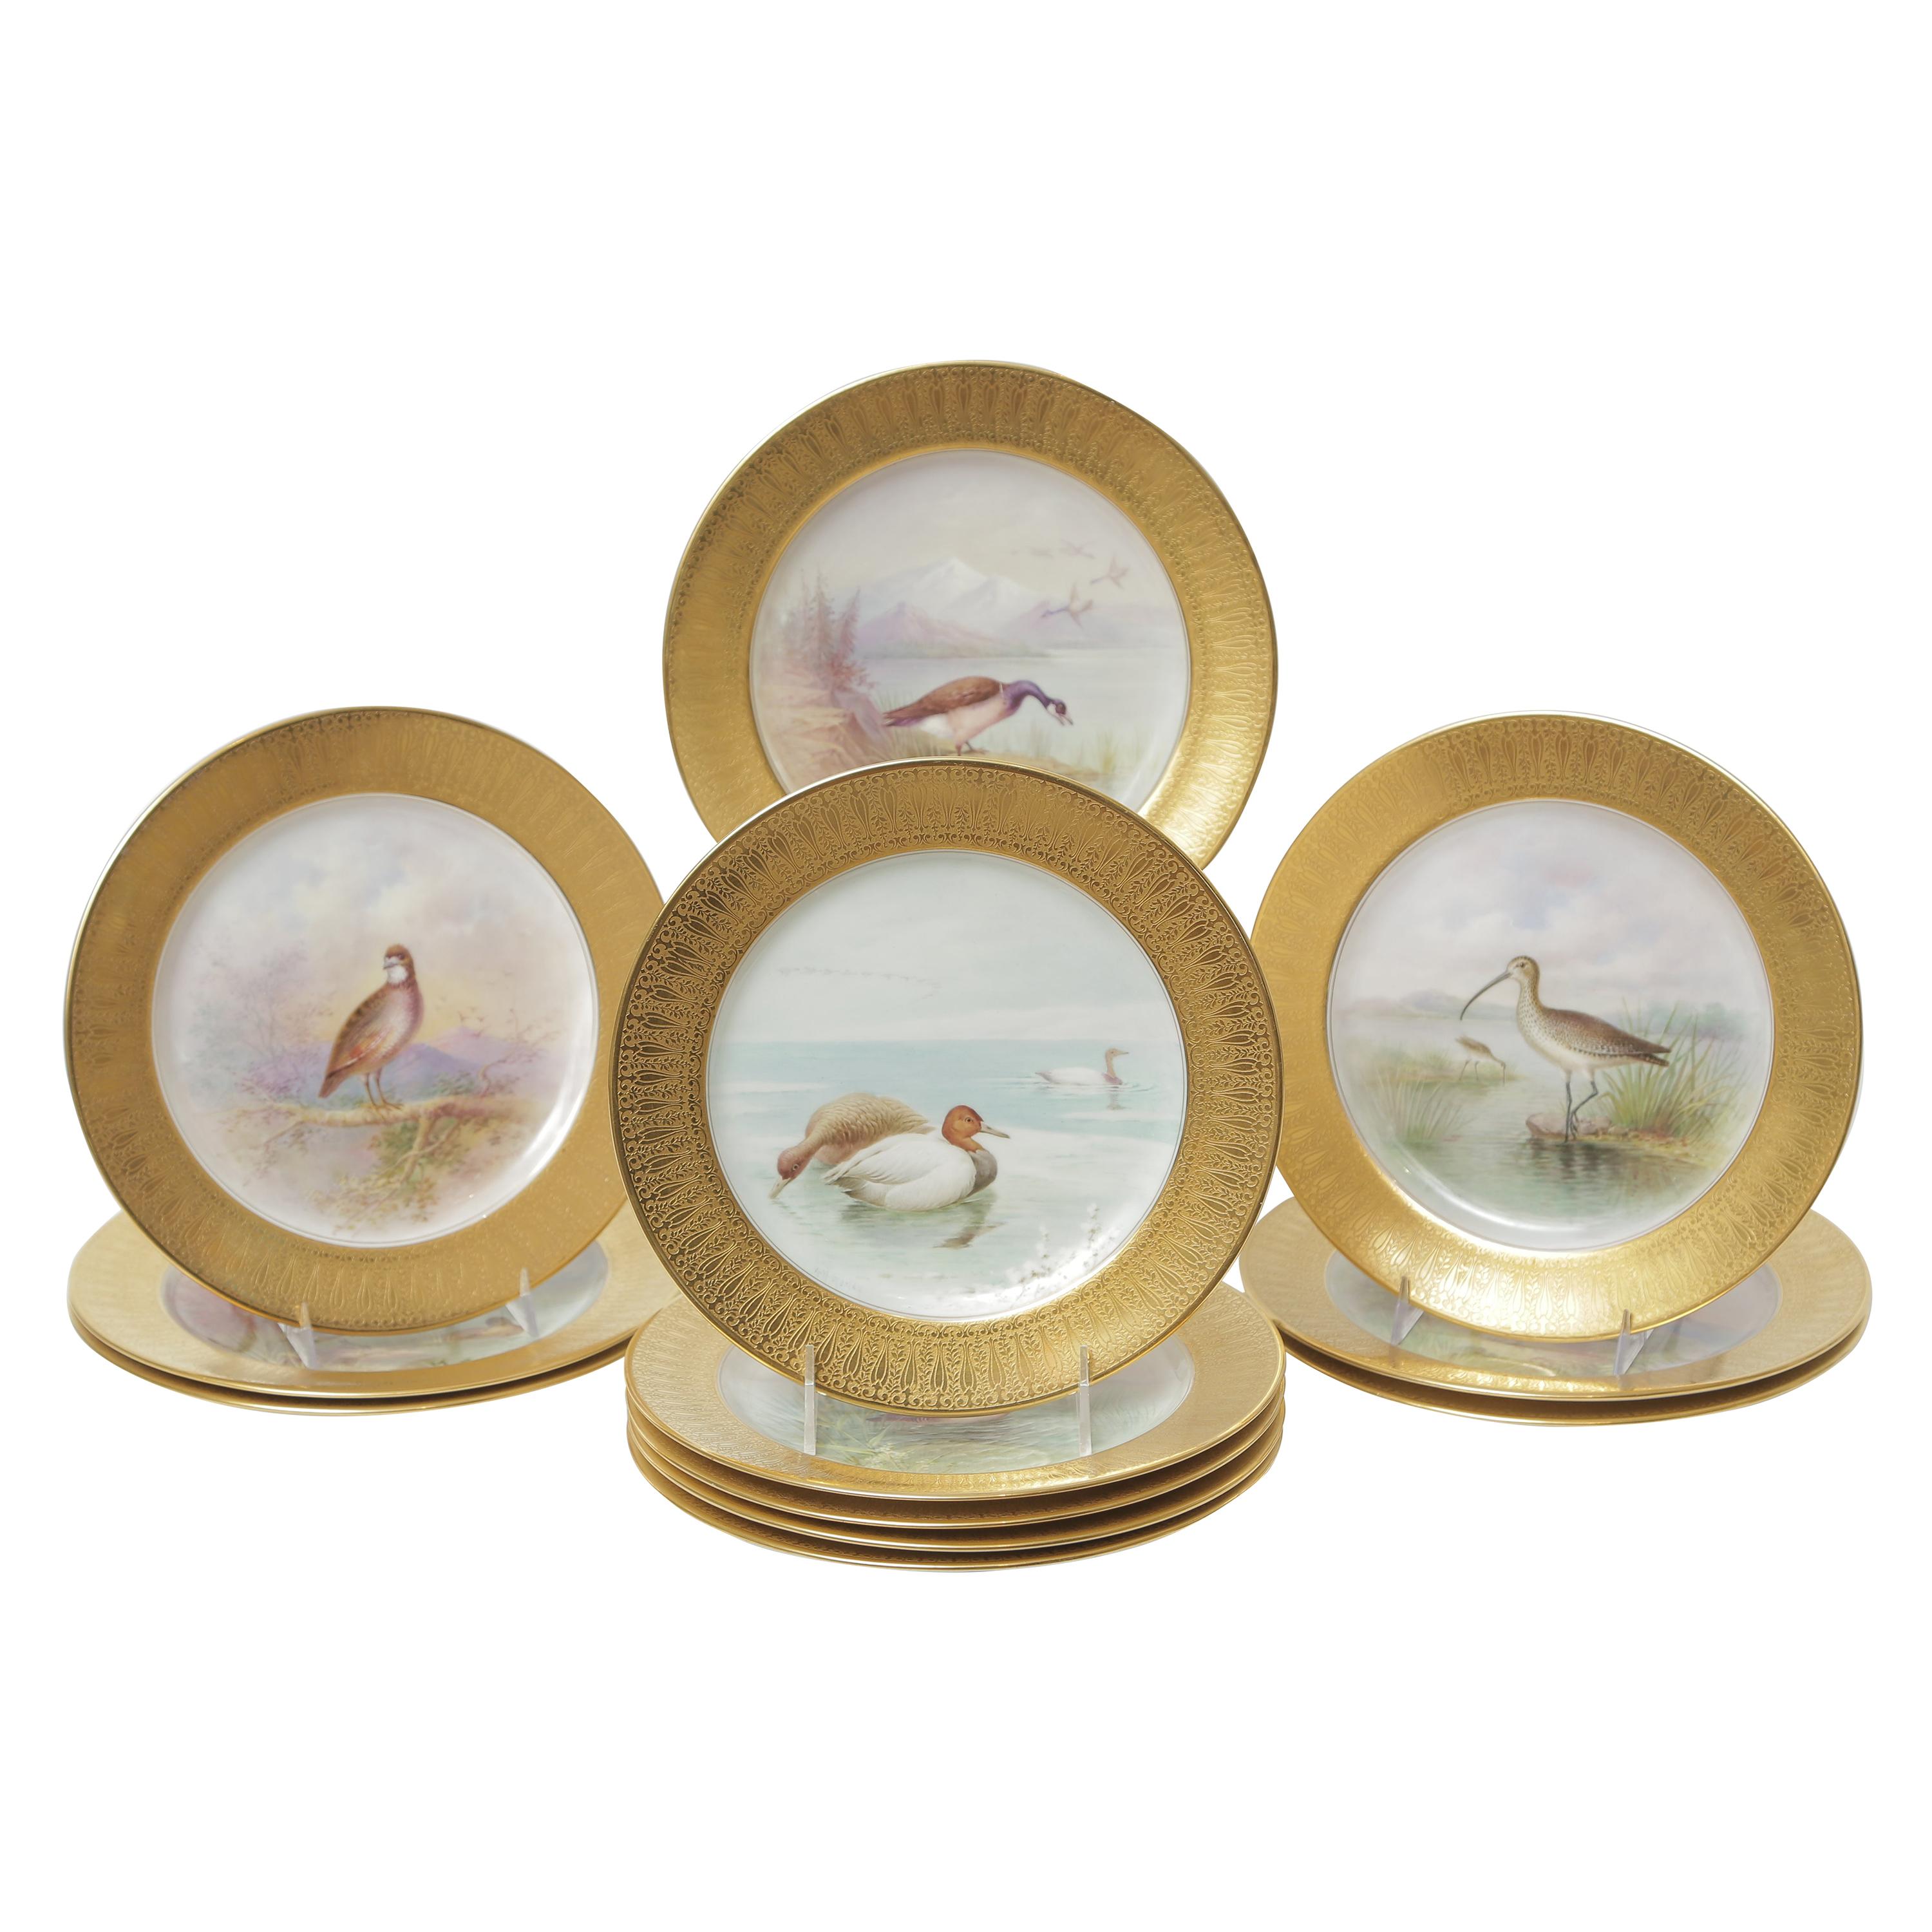 12 Tiffany Antique Porcelain Game Bird Plates, Hand Painted, circa 1920